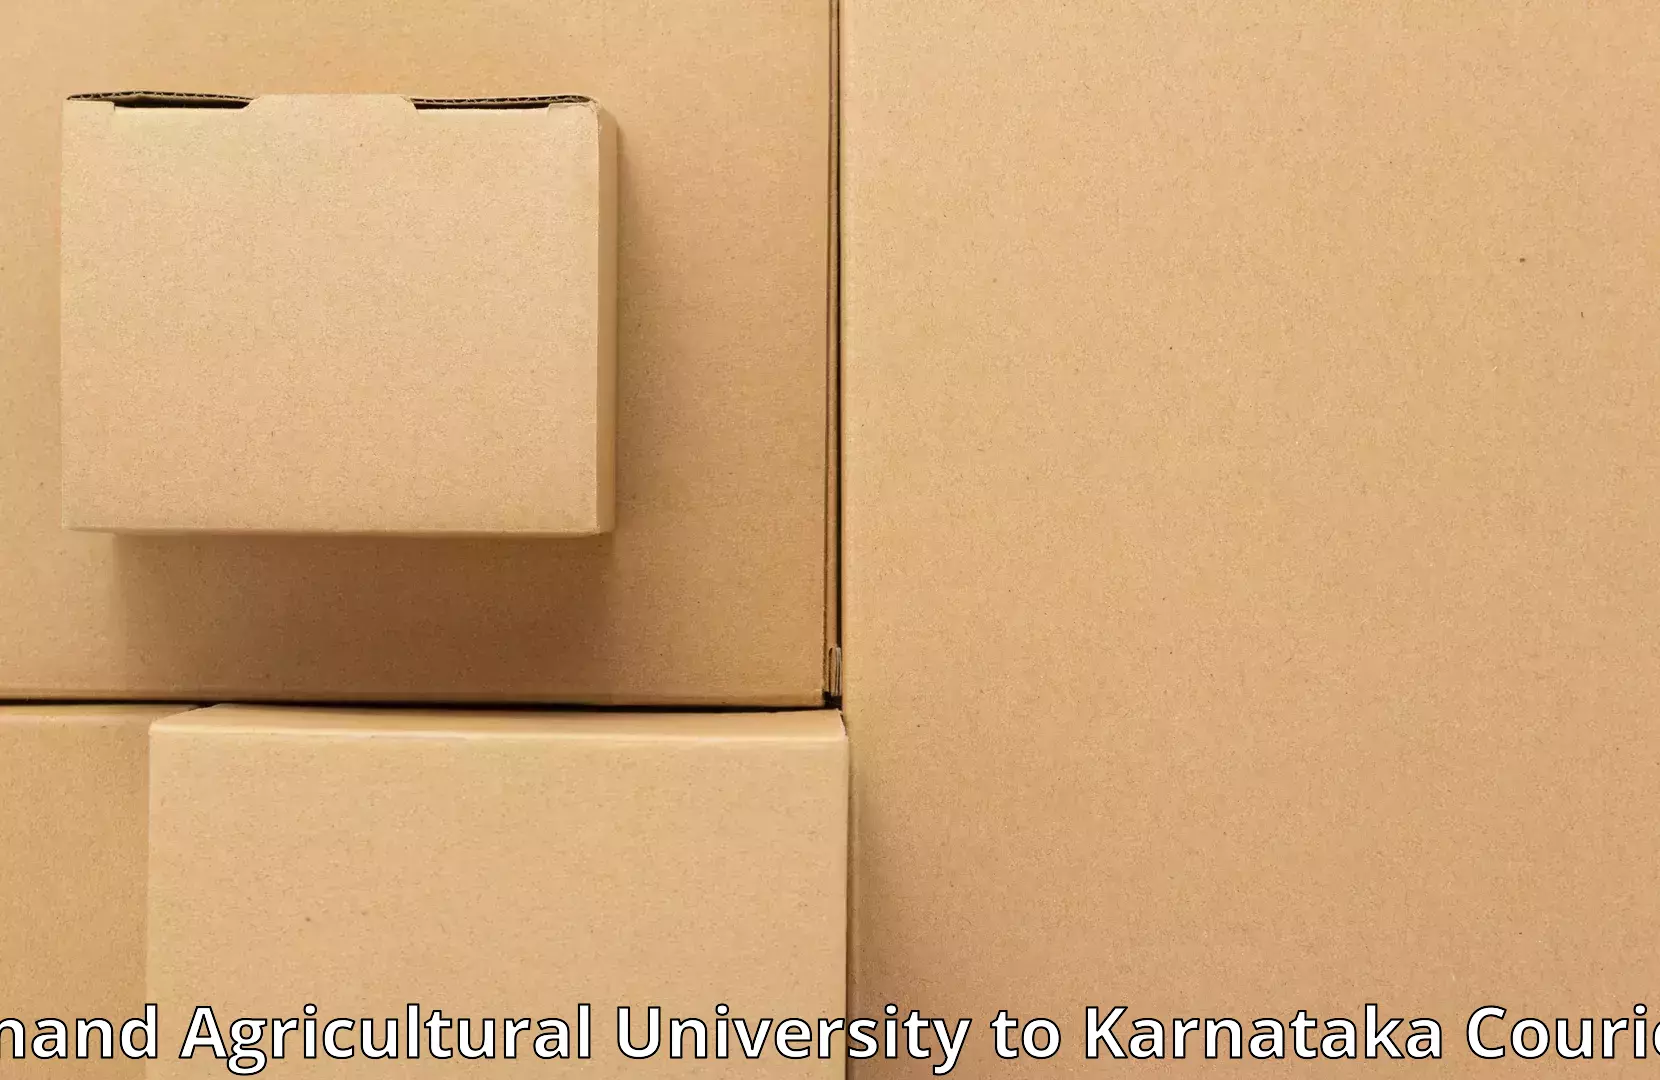 Furniture shipping services Anand Agricultural University to Panja Dakshin Kannad